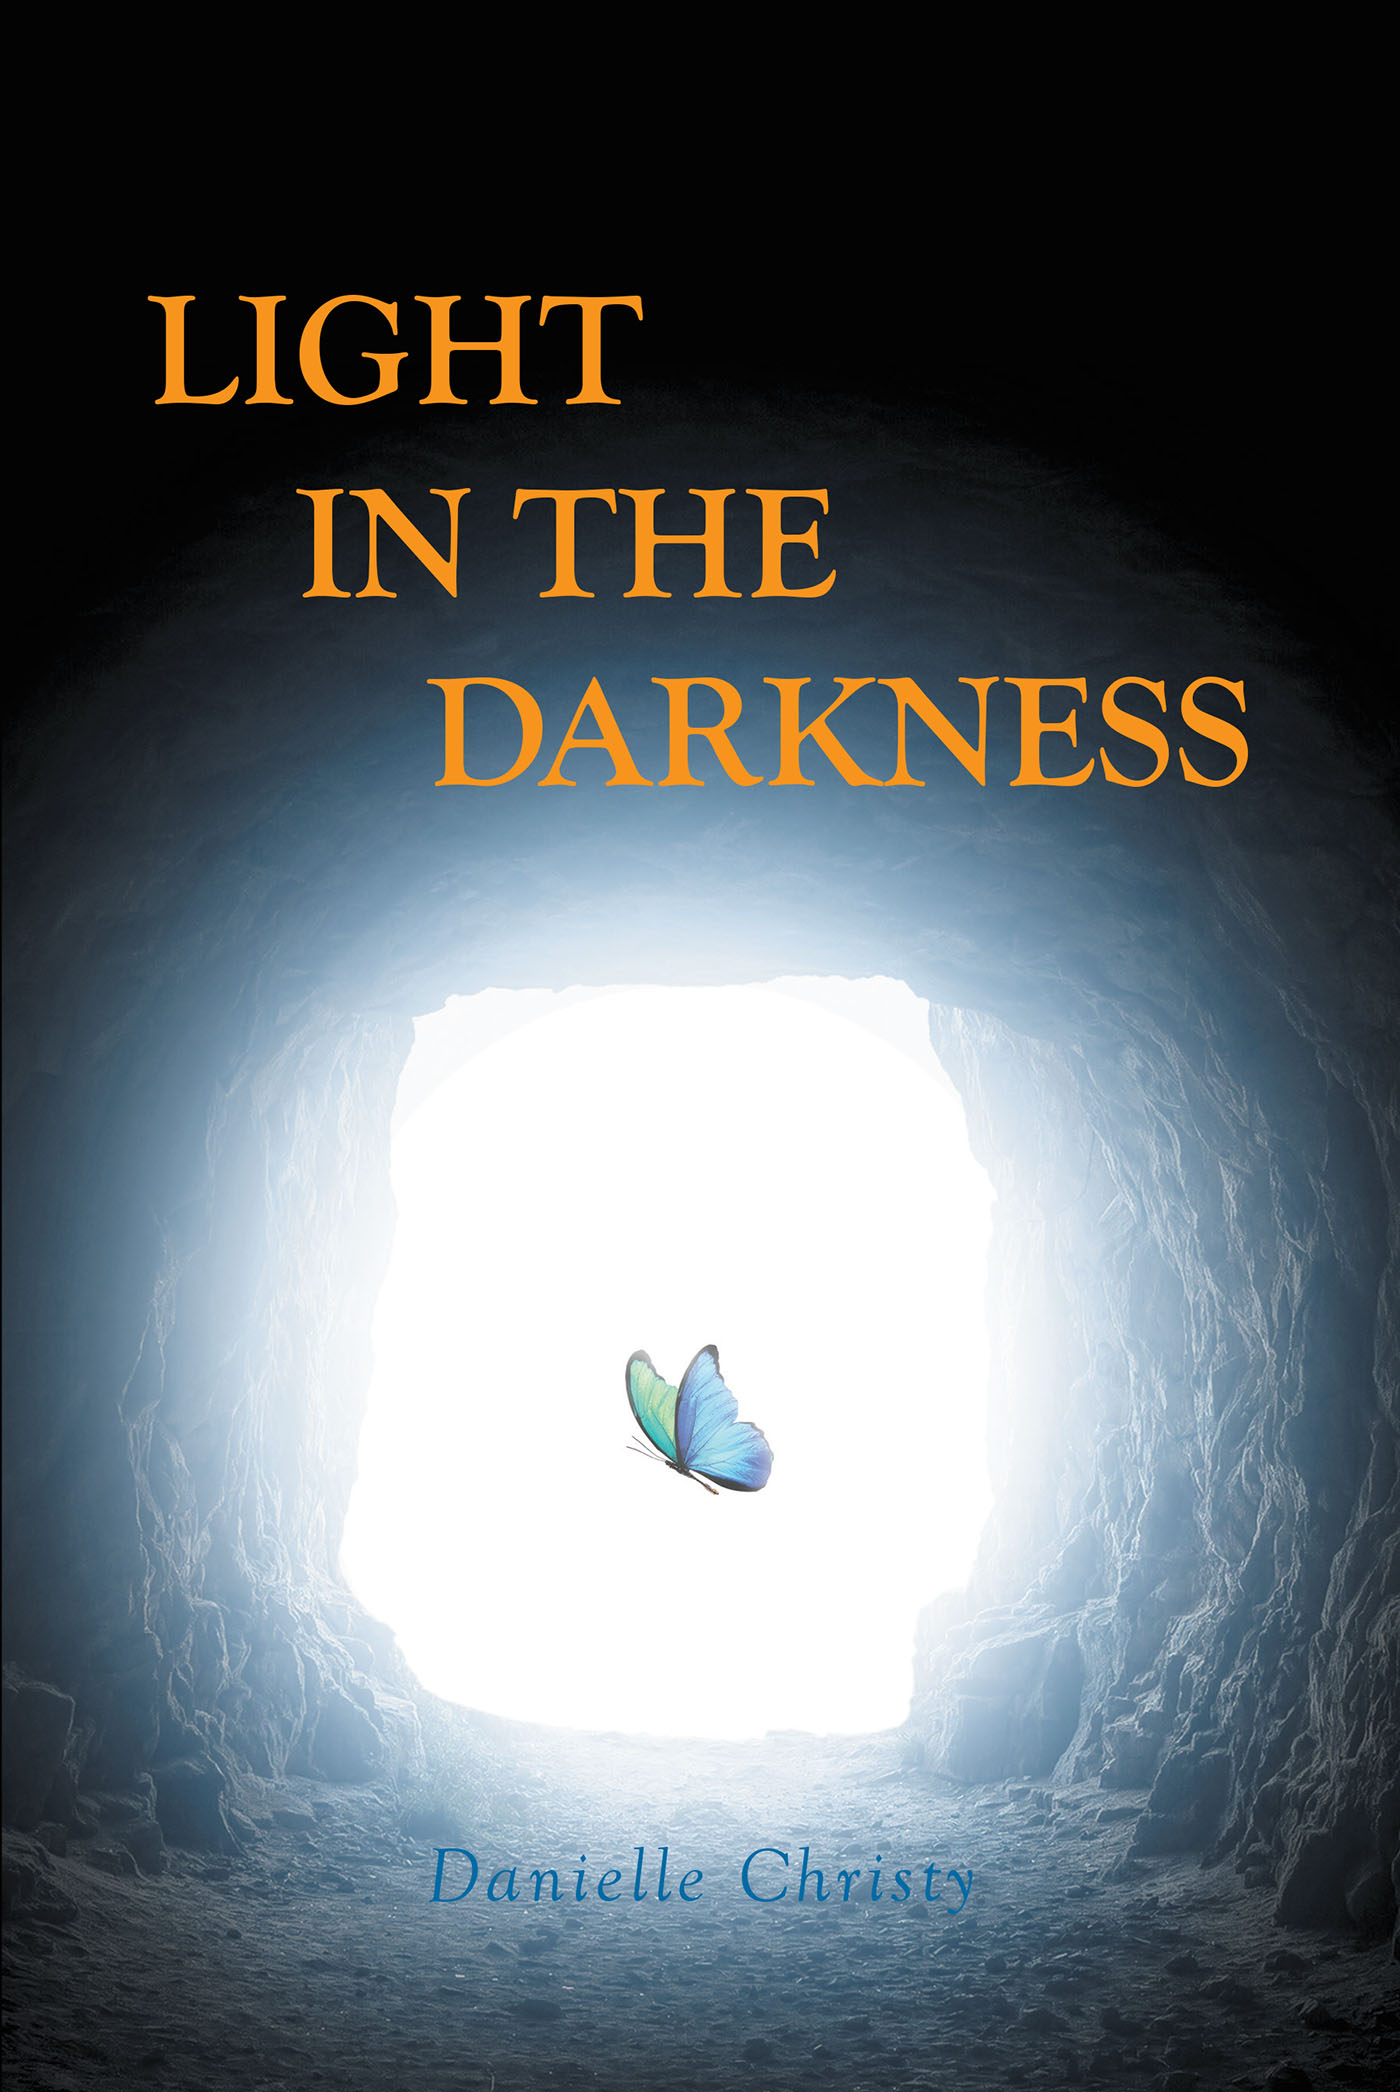 Danielle Christy’s Newly Released "Light in the Darkness" is an Intimate Collection of Poetry That Explores the Highs and Lows of Mental Health